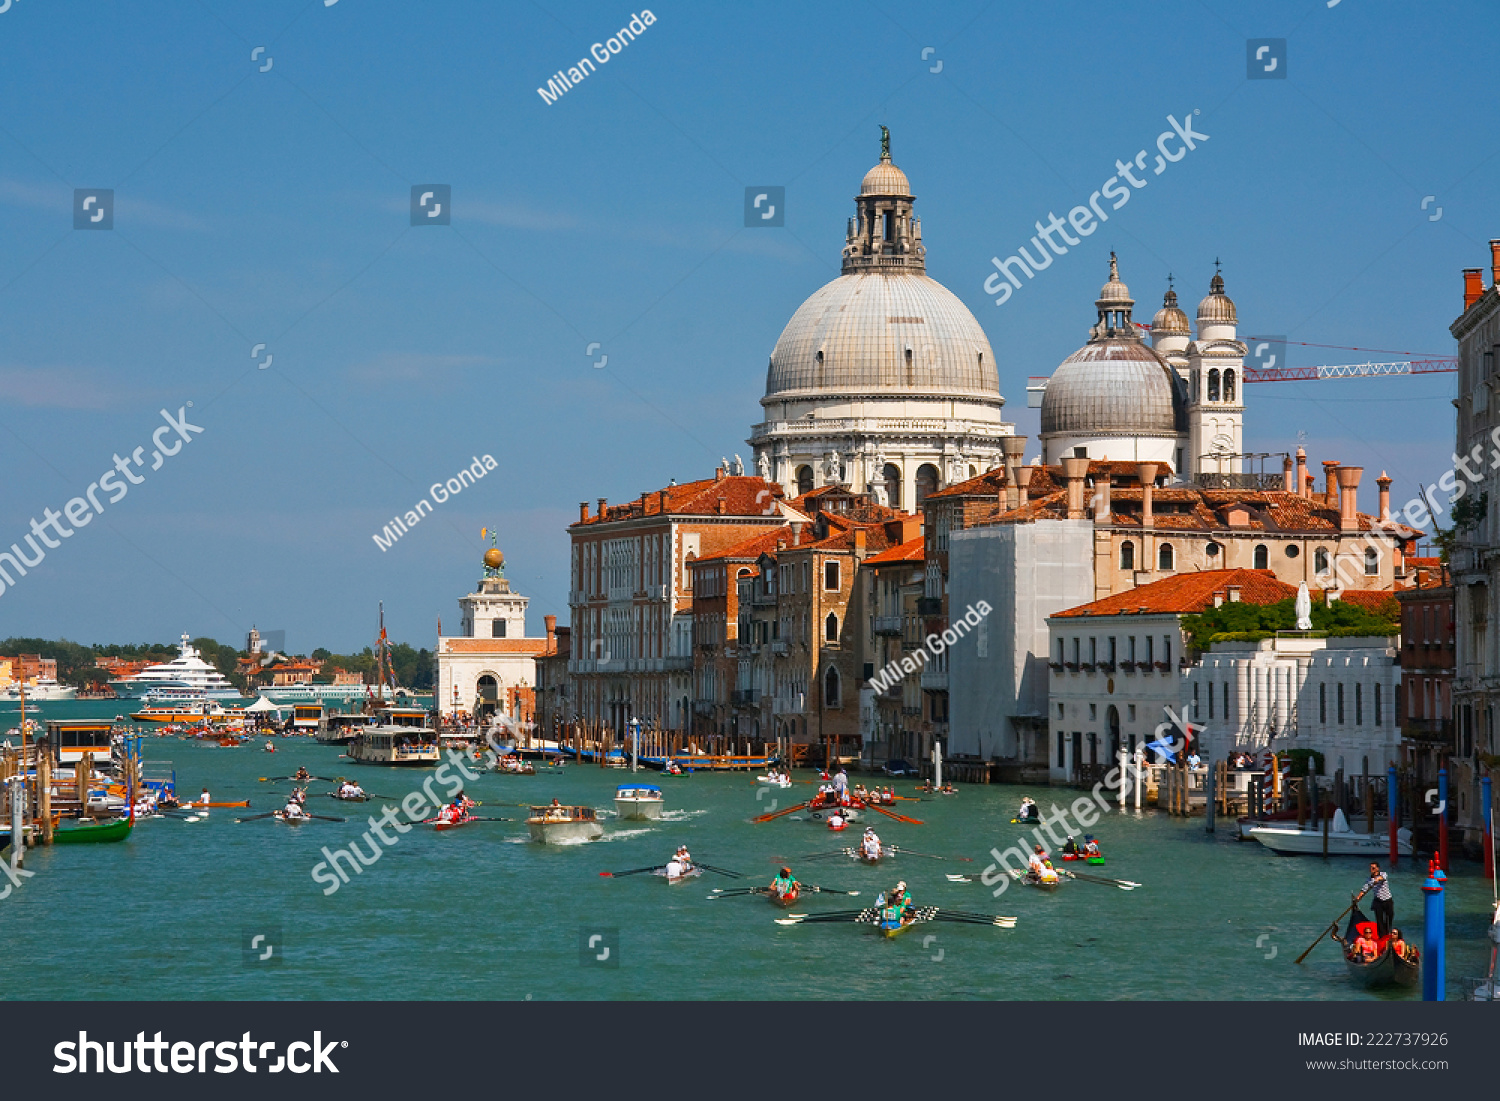 Venice, Italy  May 27 2012: Rowing boats during the Vogalonga event in Venice, Italy. #222737926